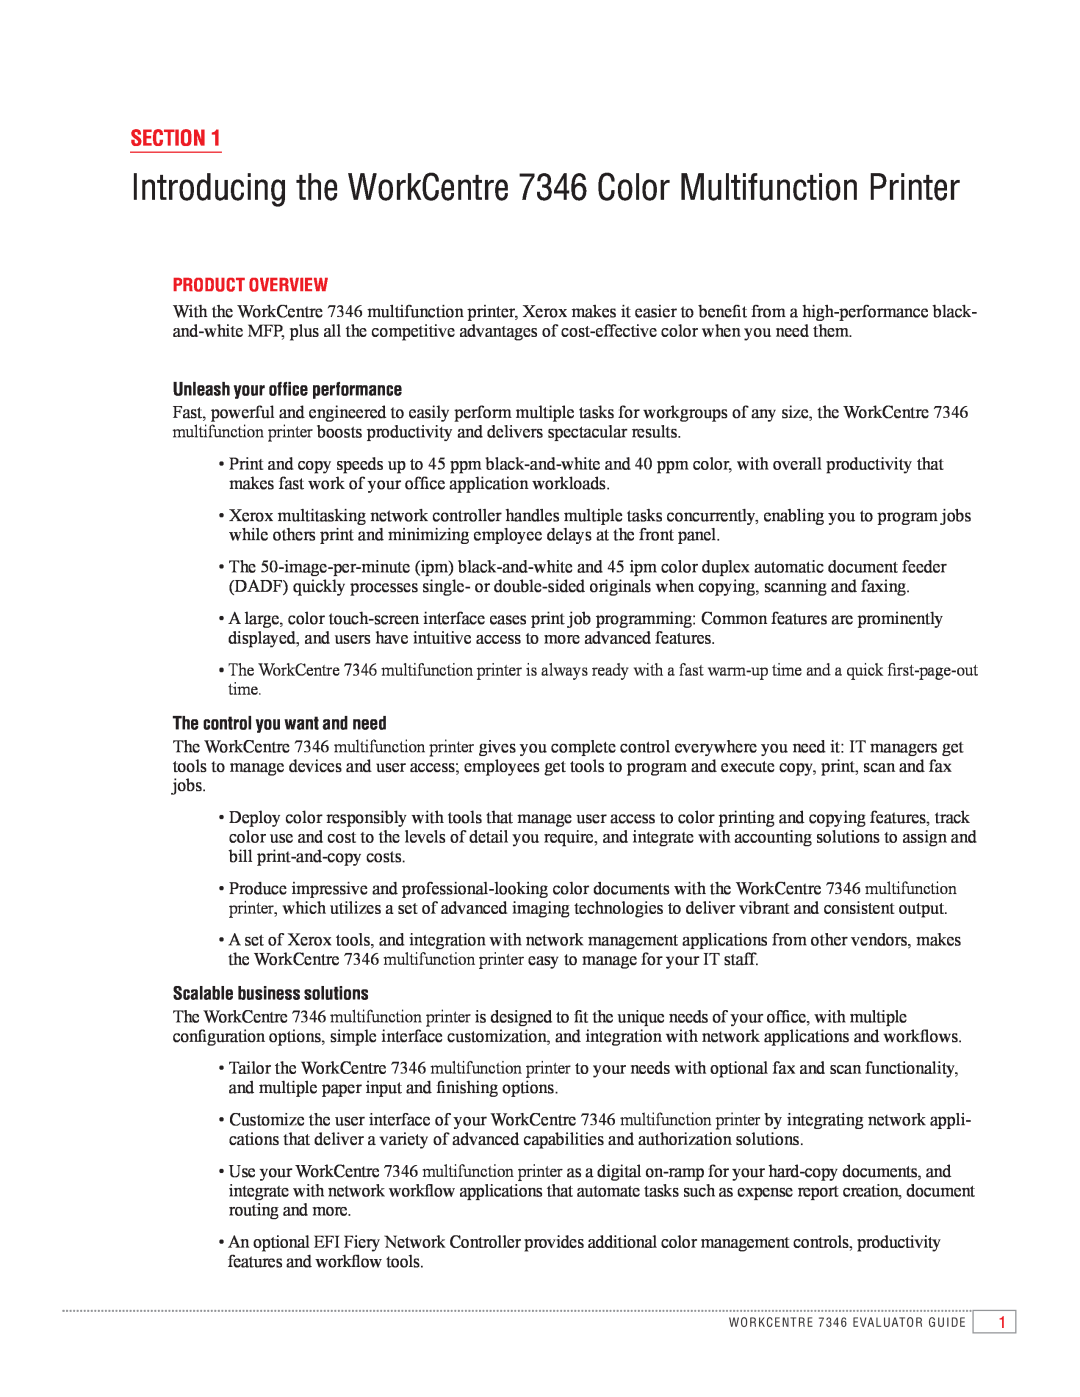 Xerox manual Section, Introducing the WorkCentre 7346 Color Multifunction Printer, Product Overview 